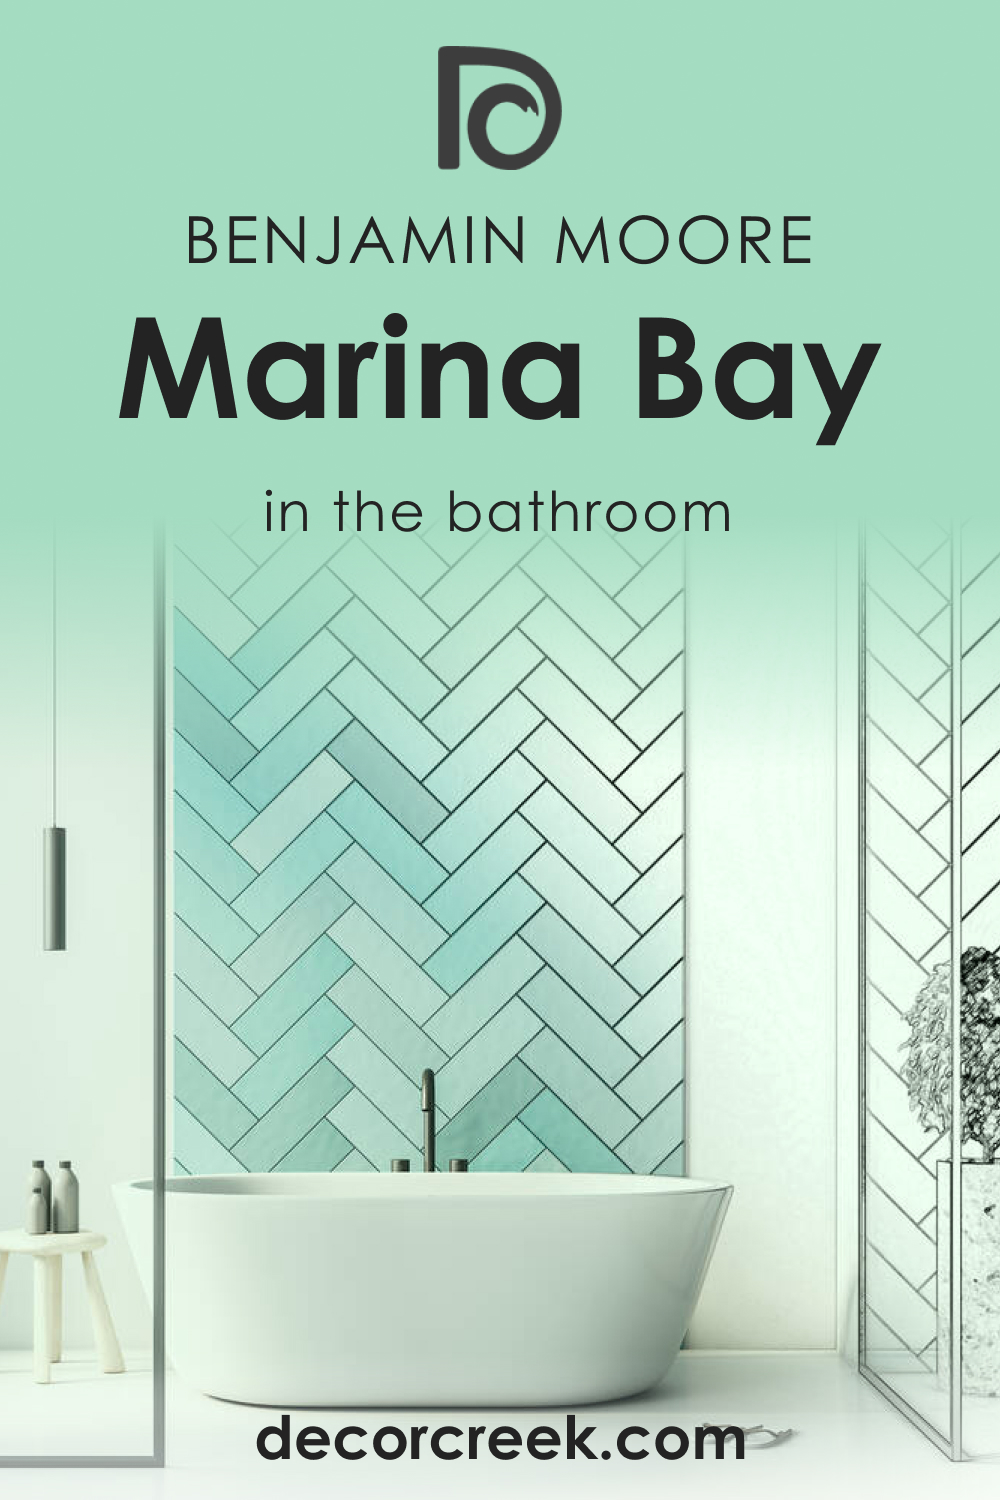 How to Use Marina Bay 2036-50 in the Bathroom?